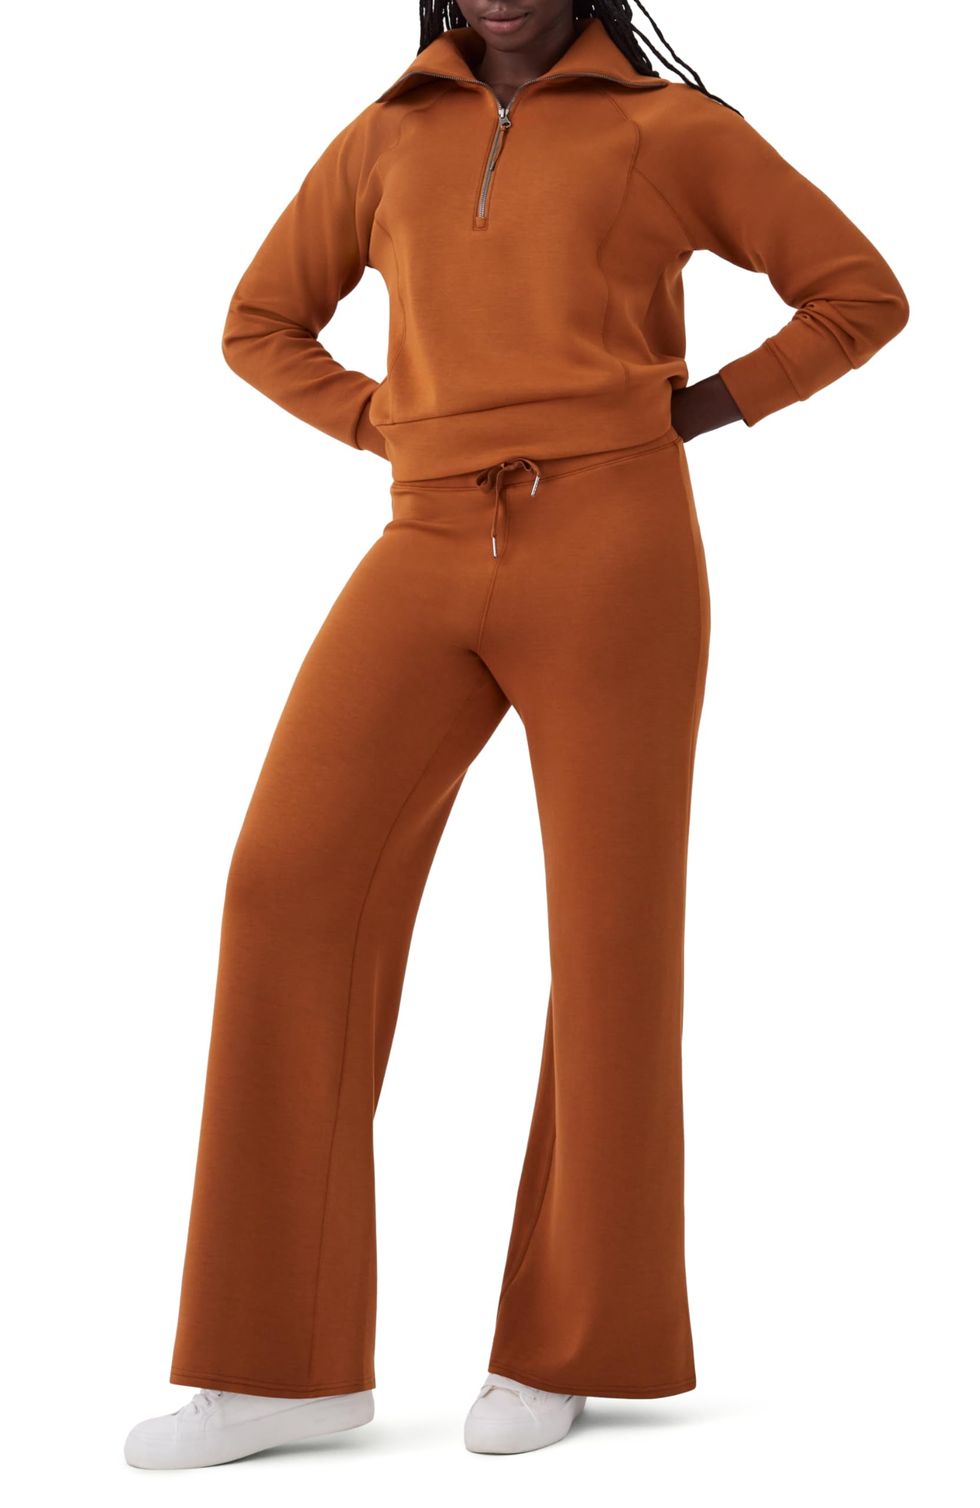 Oprah Made These Spanx Pants Go Viral — and They're on Sale for Black Friday